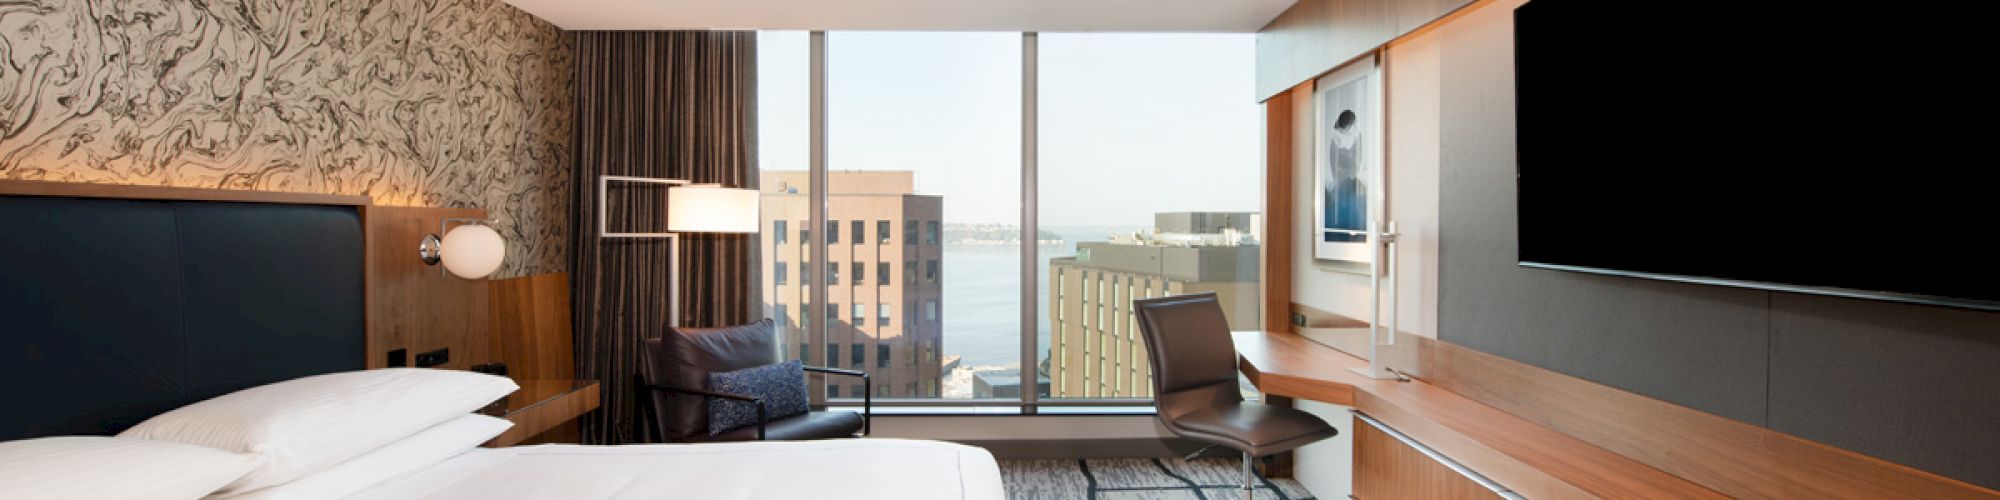 A modern hotel room with a large bed, a desk, a TV, and a view of buildings through floor-to-ceiling windows.